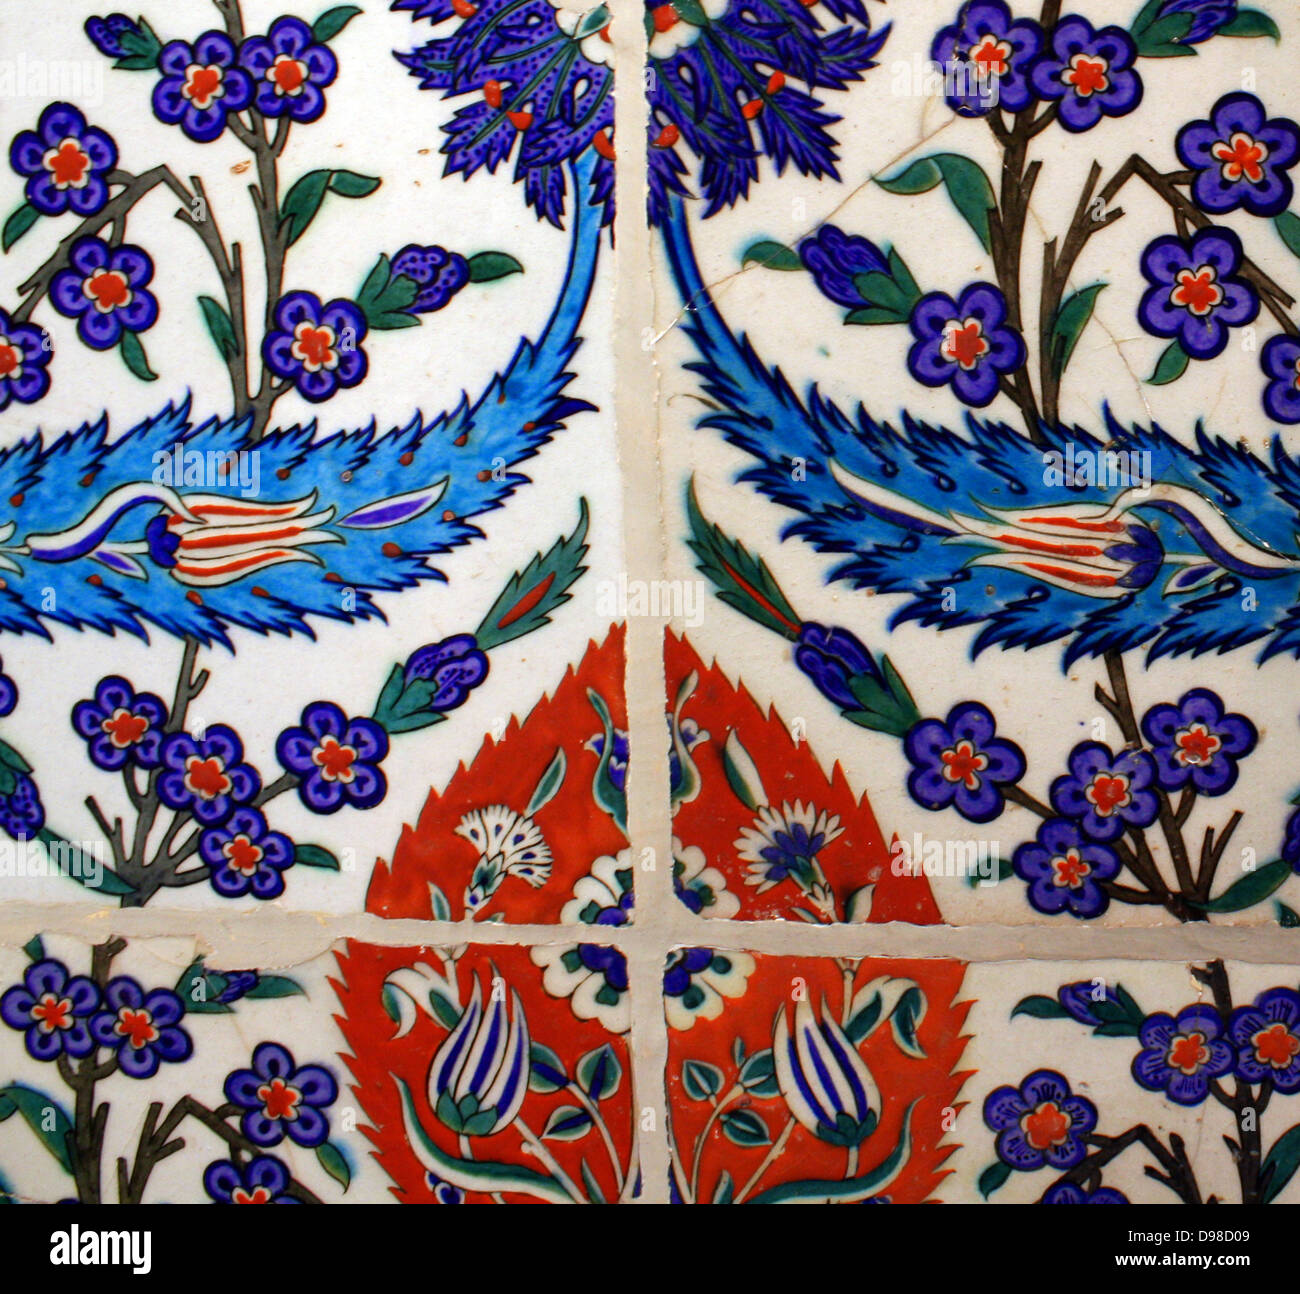 Tiles from Turkey 1550-1600 1.Pair of tiles with peonies and serrated leaves. Turkey about 1550-1560. Fritware with polychrome underglaze painting.  2. Set of four tiles with tulips, prunus sprays and serrated leaves.  Turkey 1550-1600.  Fritware, with polychrome underglaze painting. Stock Photo